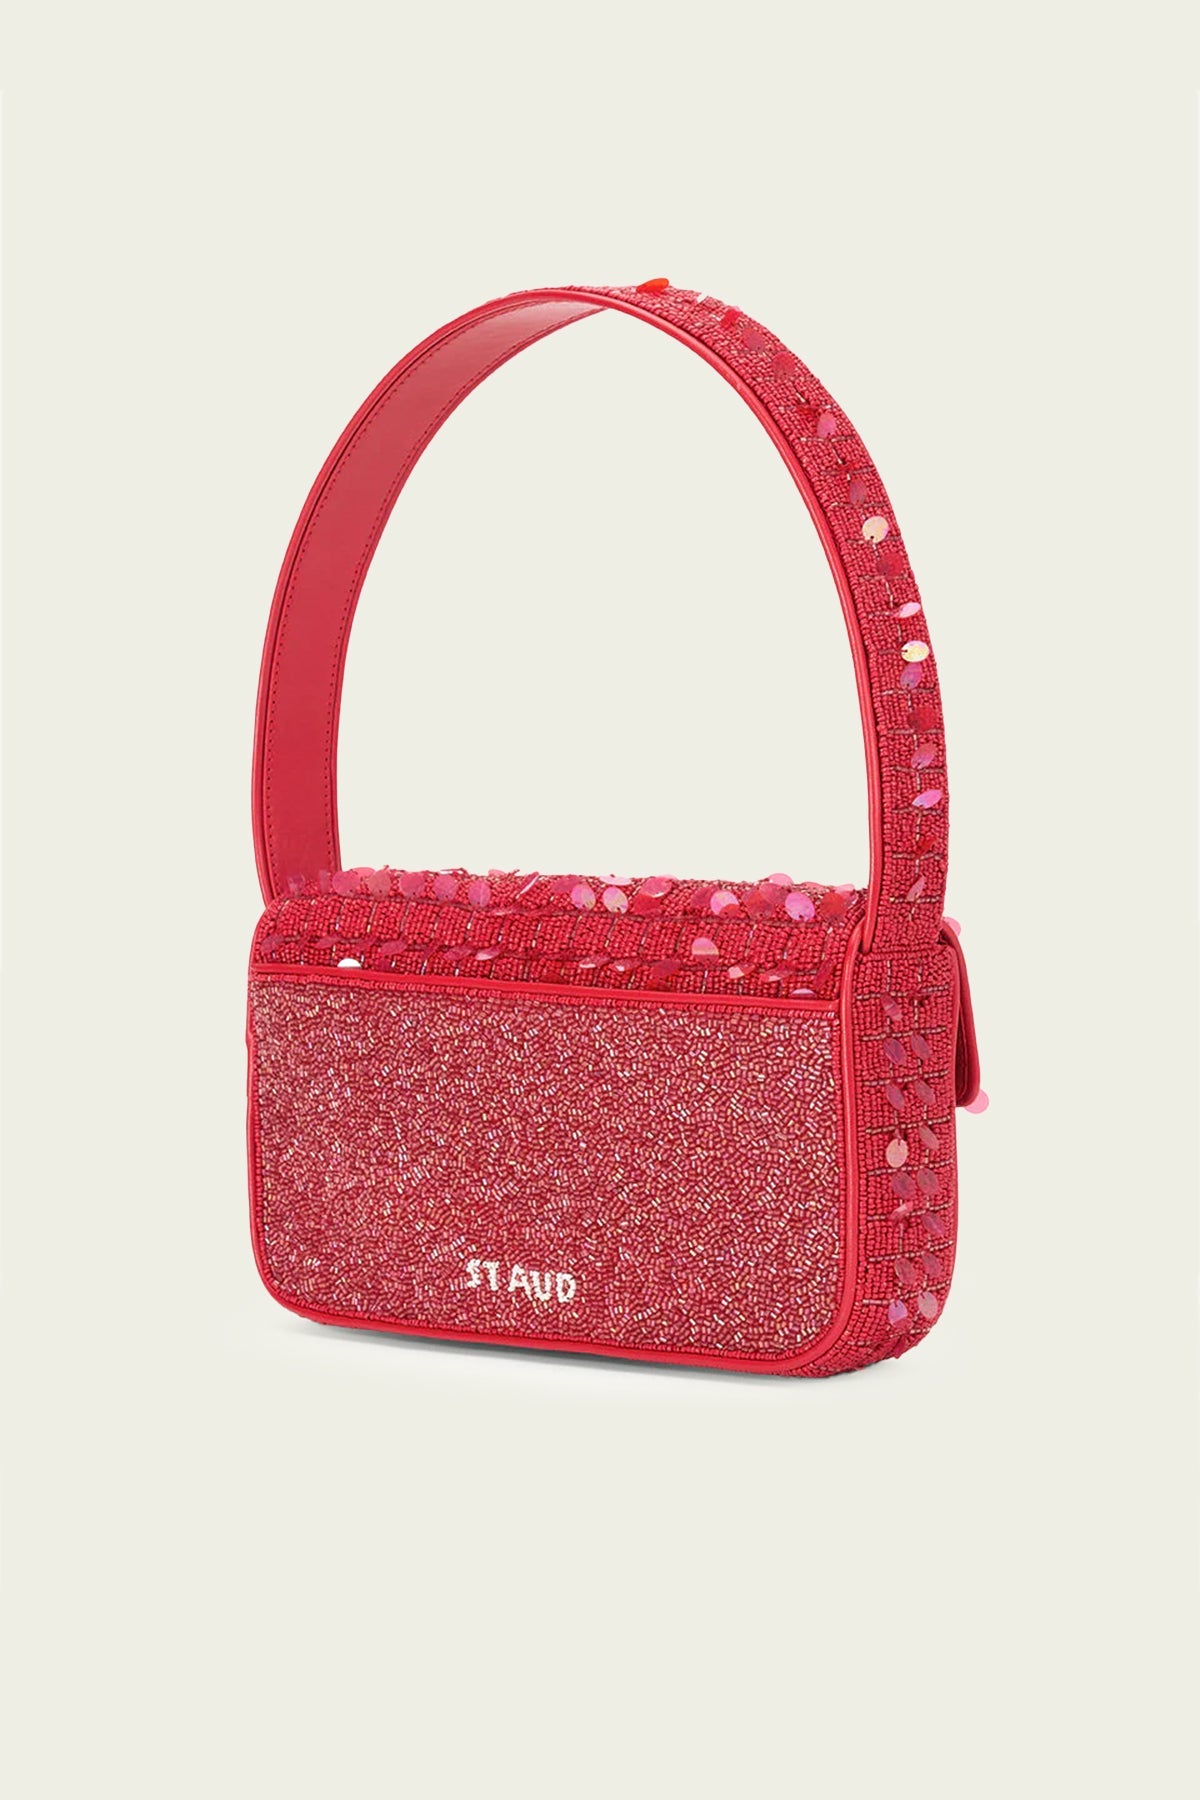 Tommy Beaded Bag in Chili - shop-olivia.com